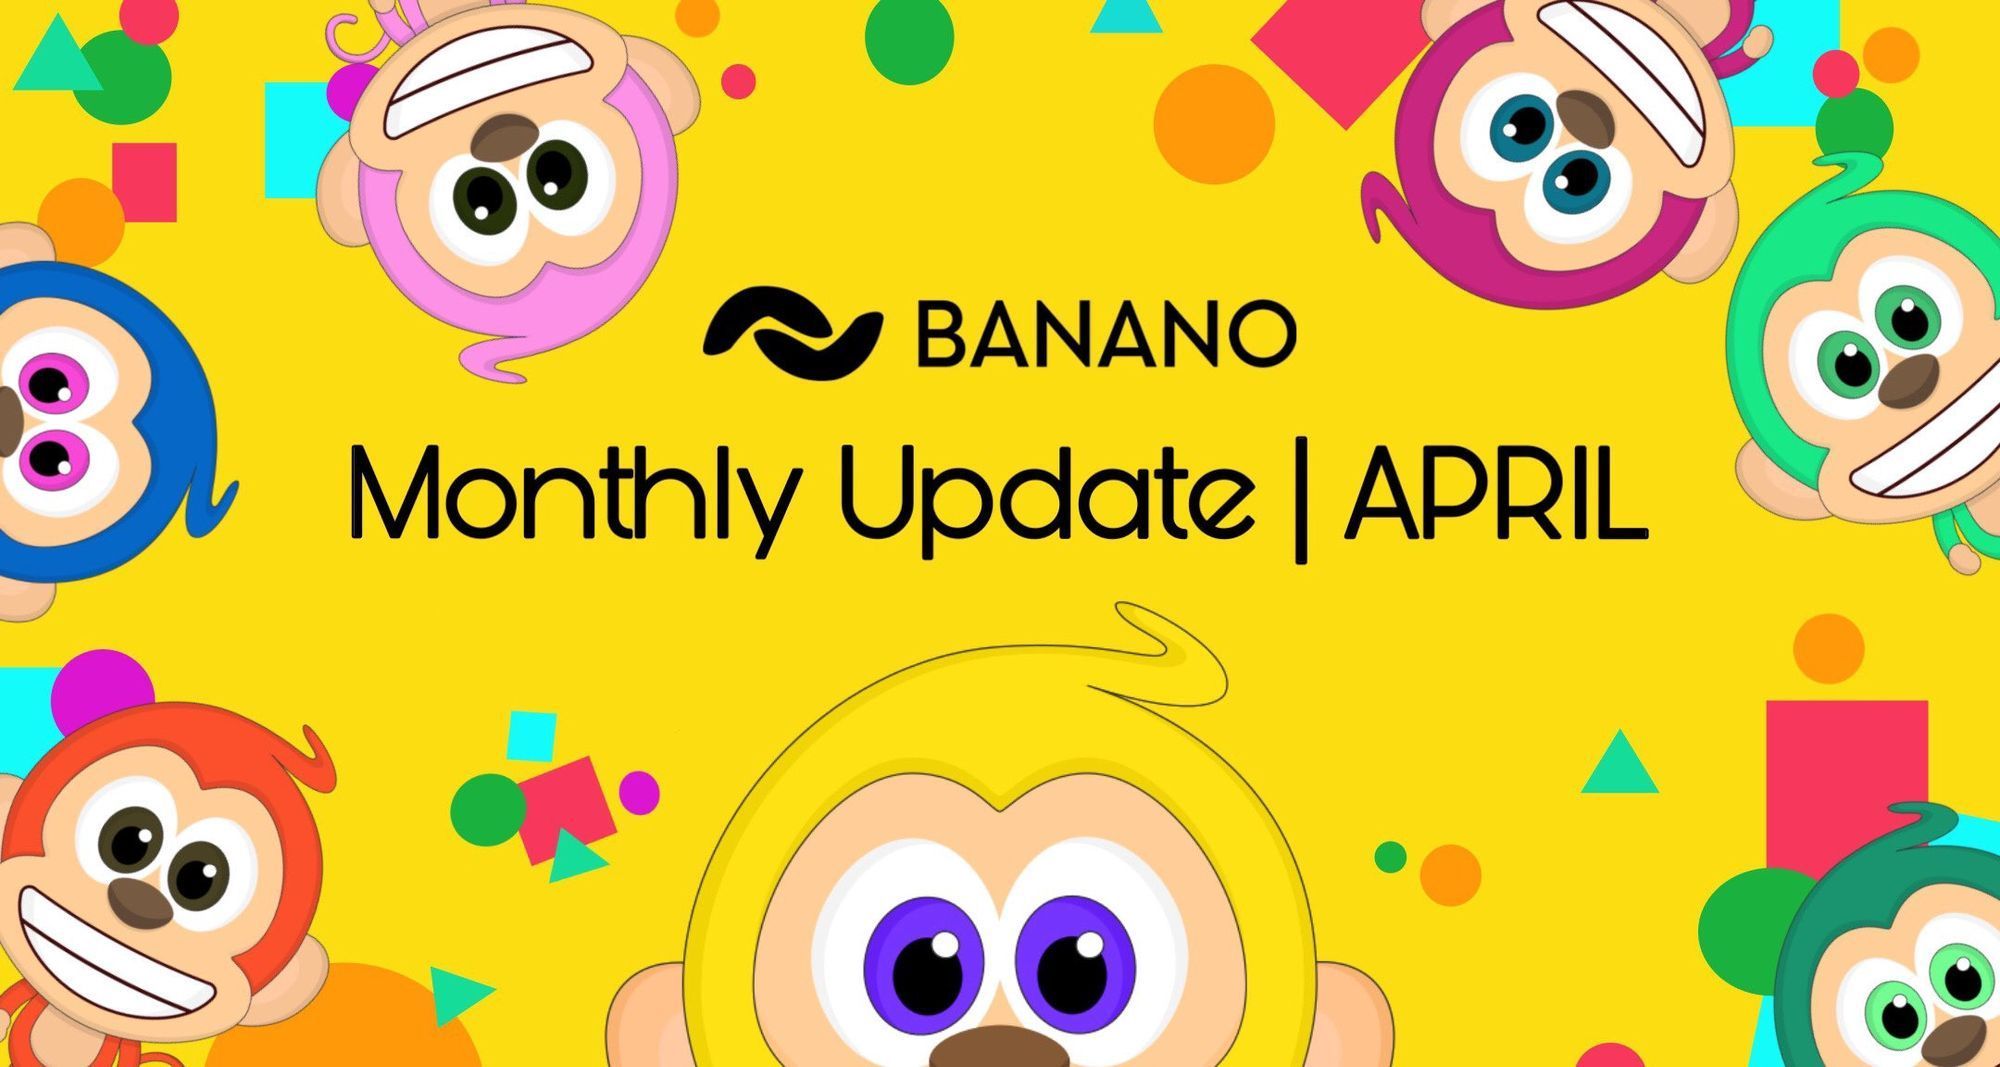 BANANO Monthly Update #24 (April 2020)